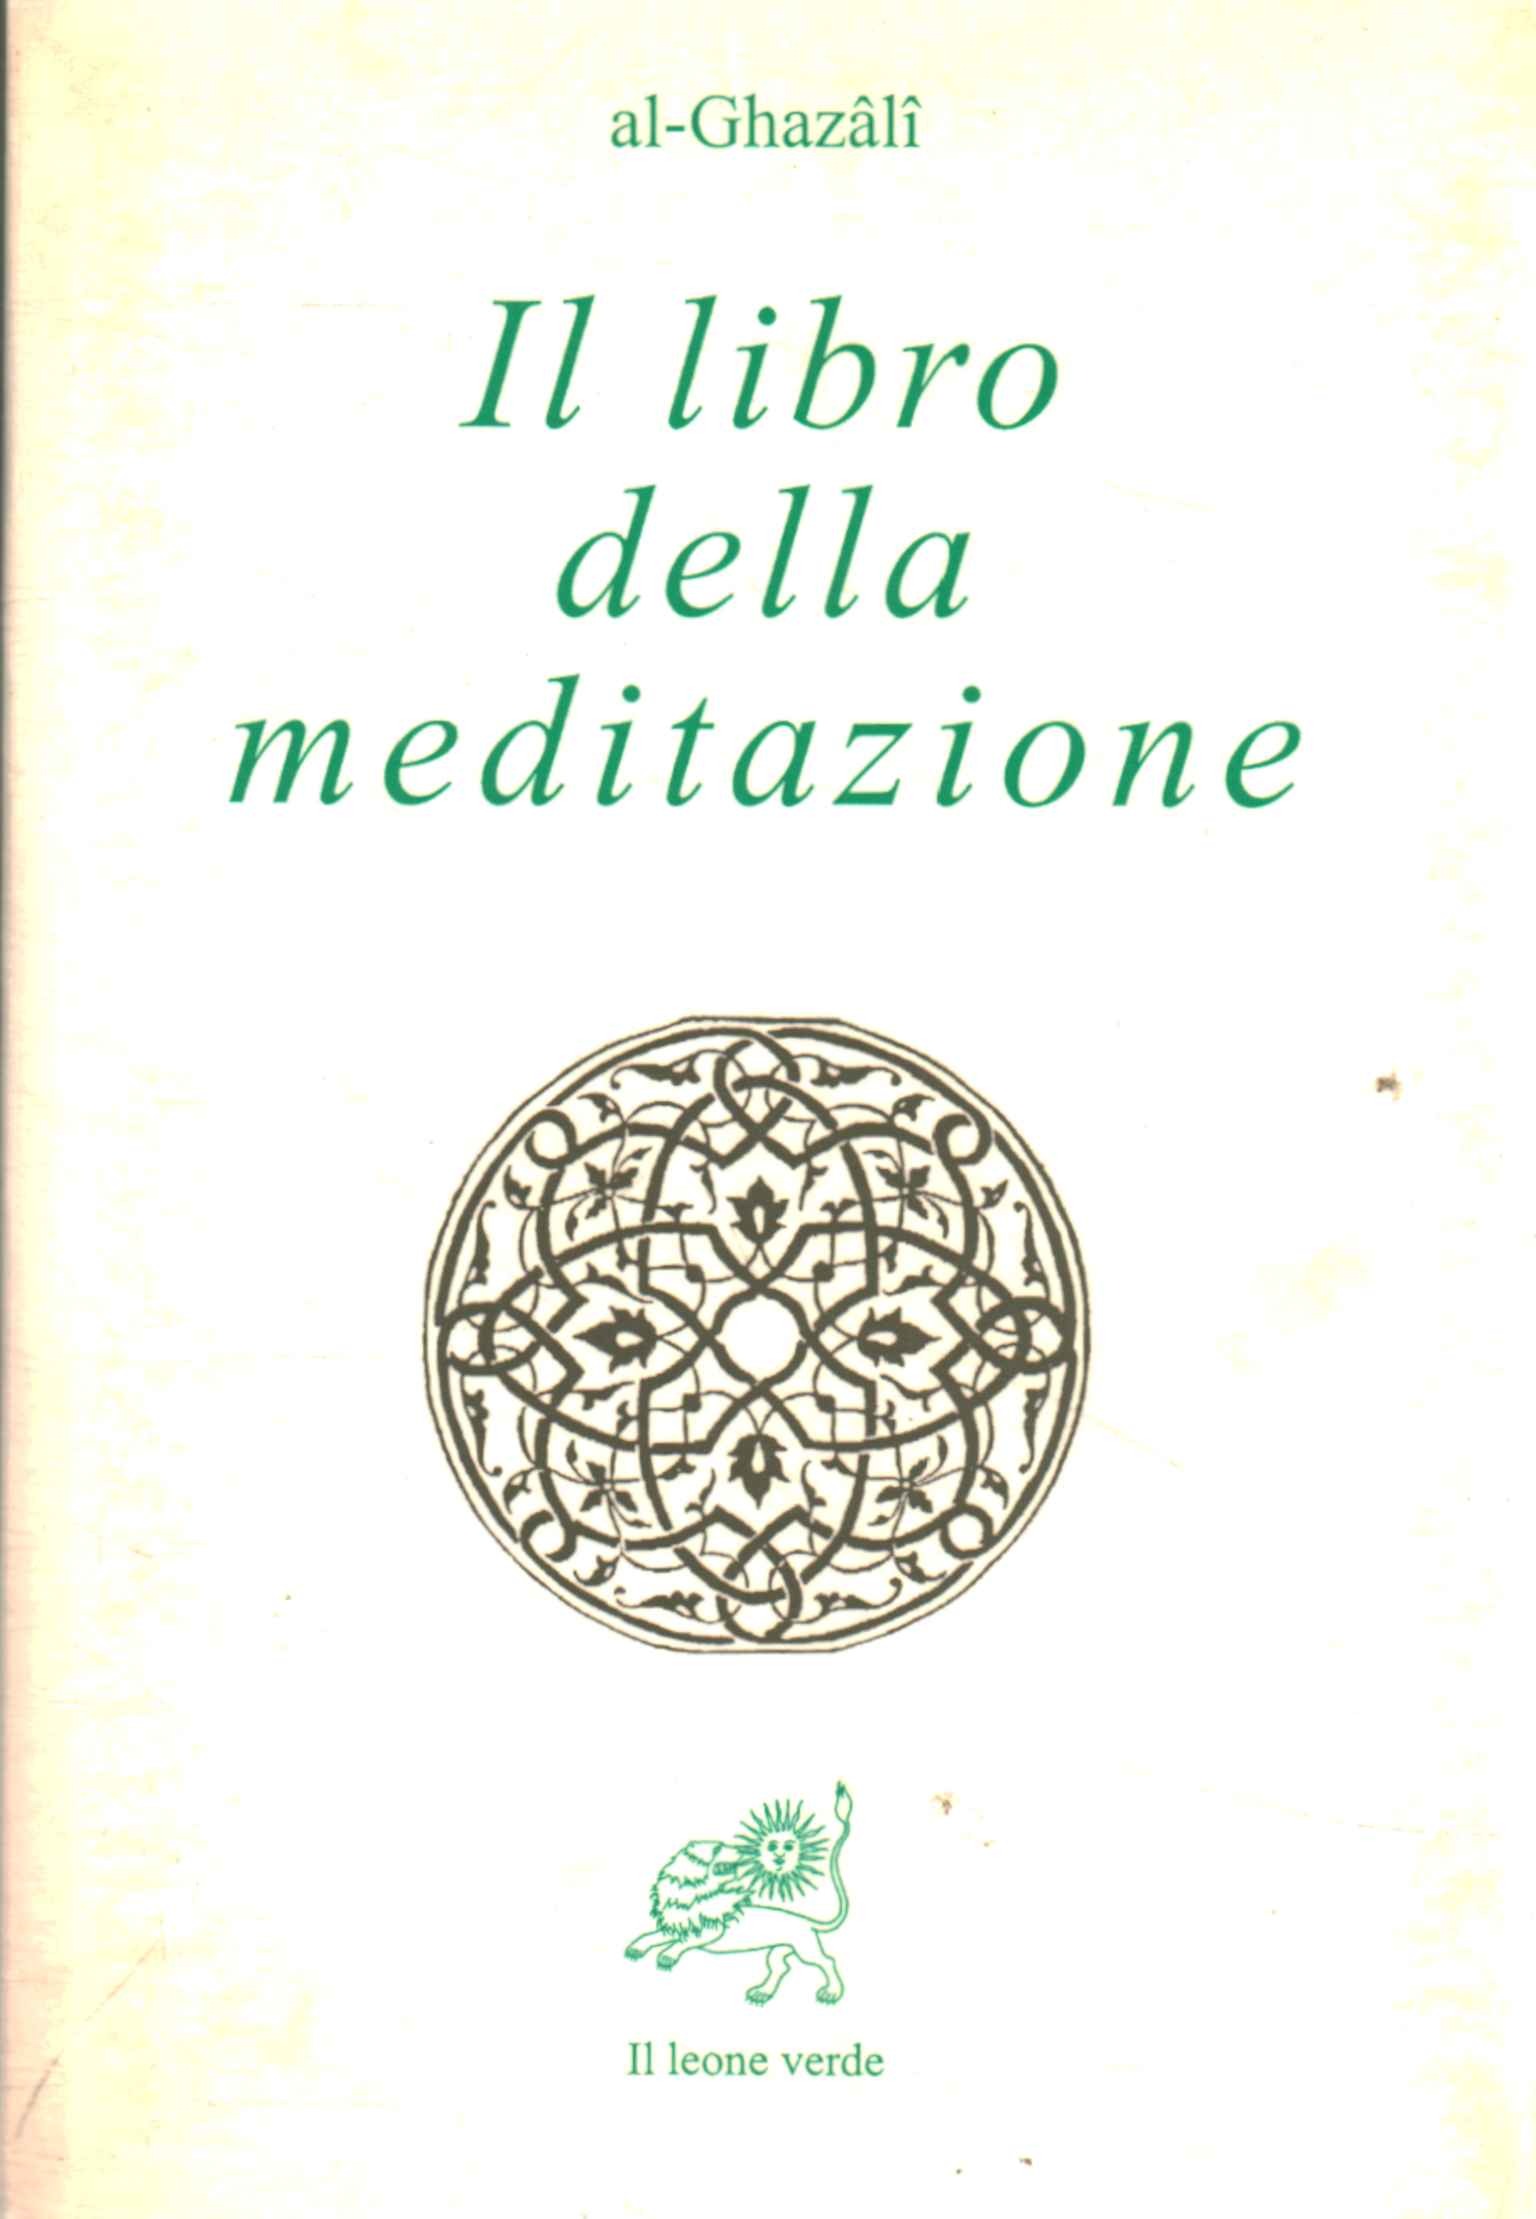 The book of meditation